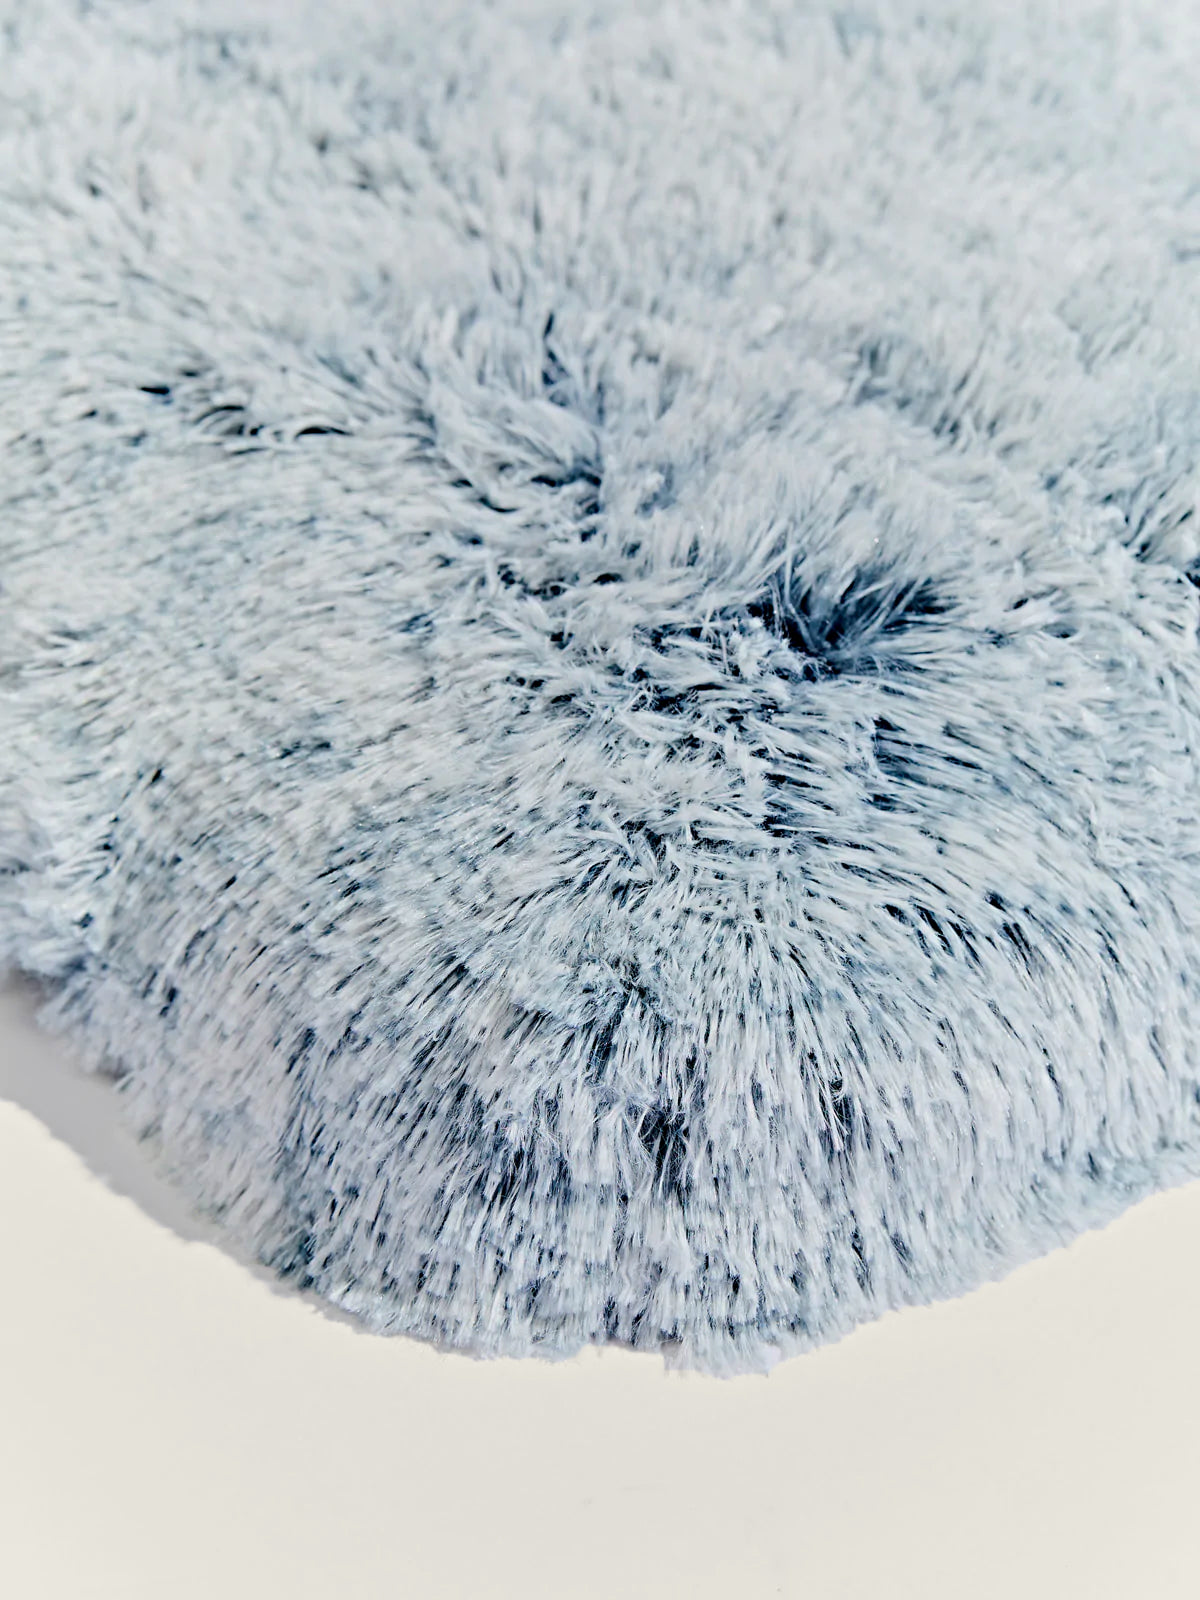 The Shaggy Fur Bed